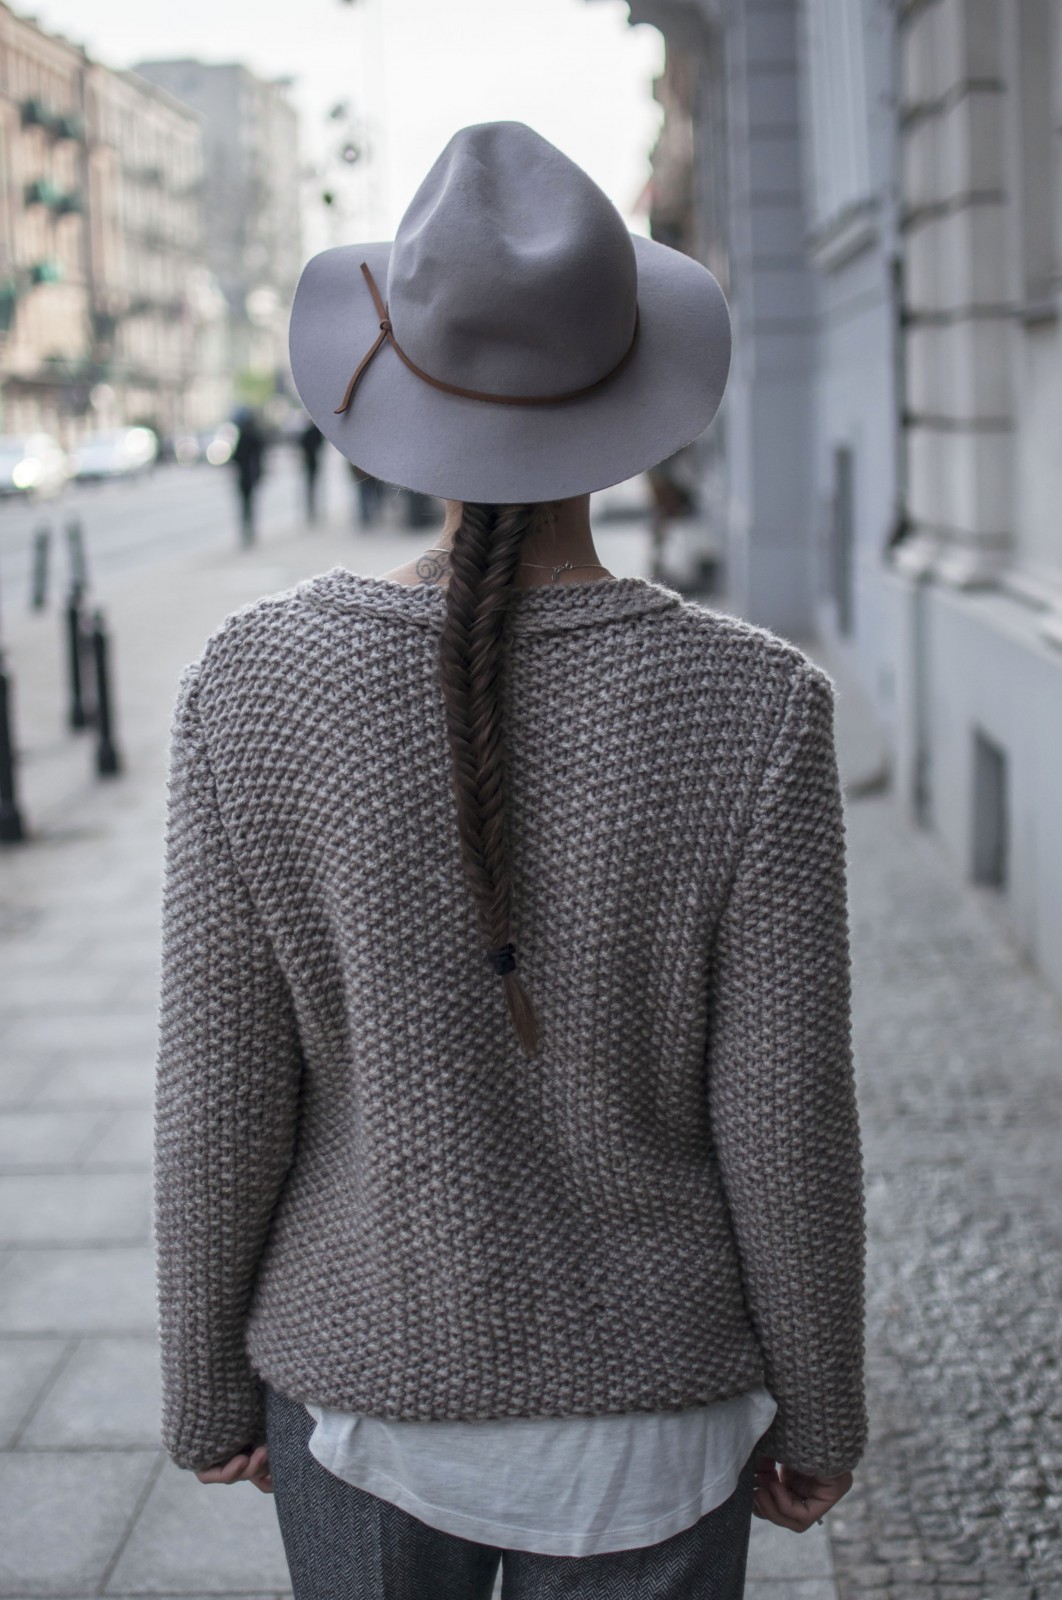 Grey Outfit: Dorota Jawinska is wearing a grey knit jumper from LeBrand and the grey hat is from River Island